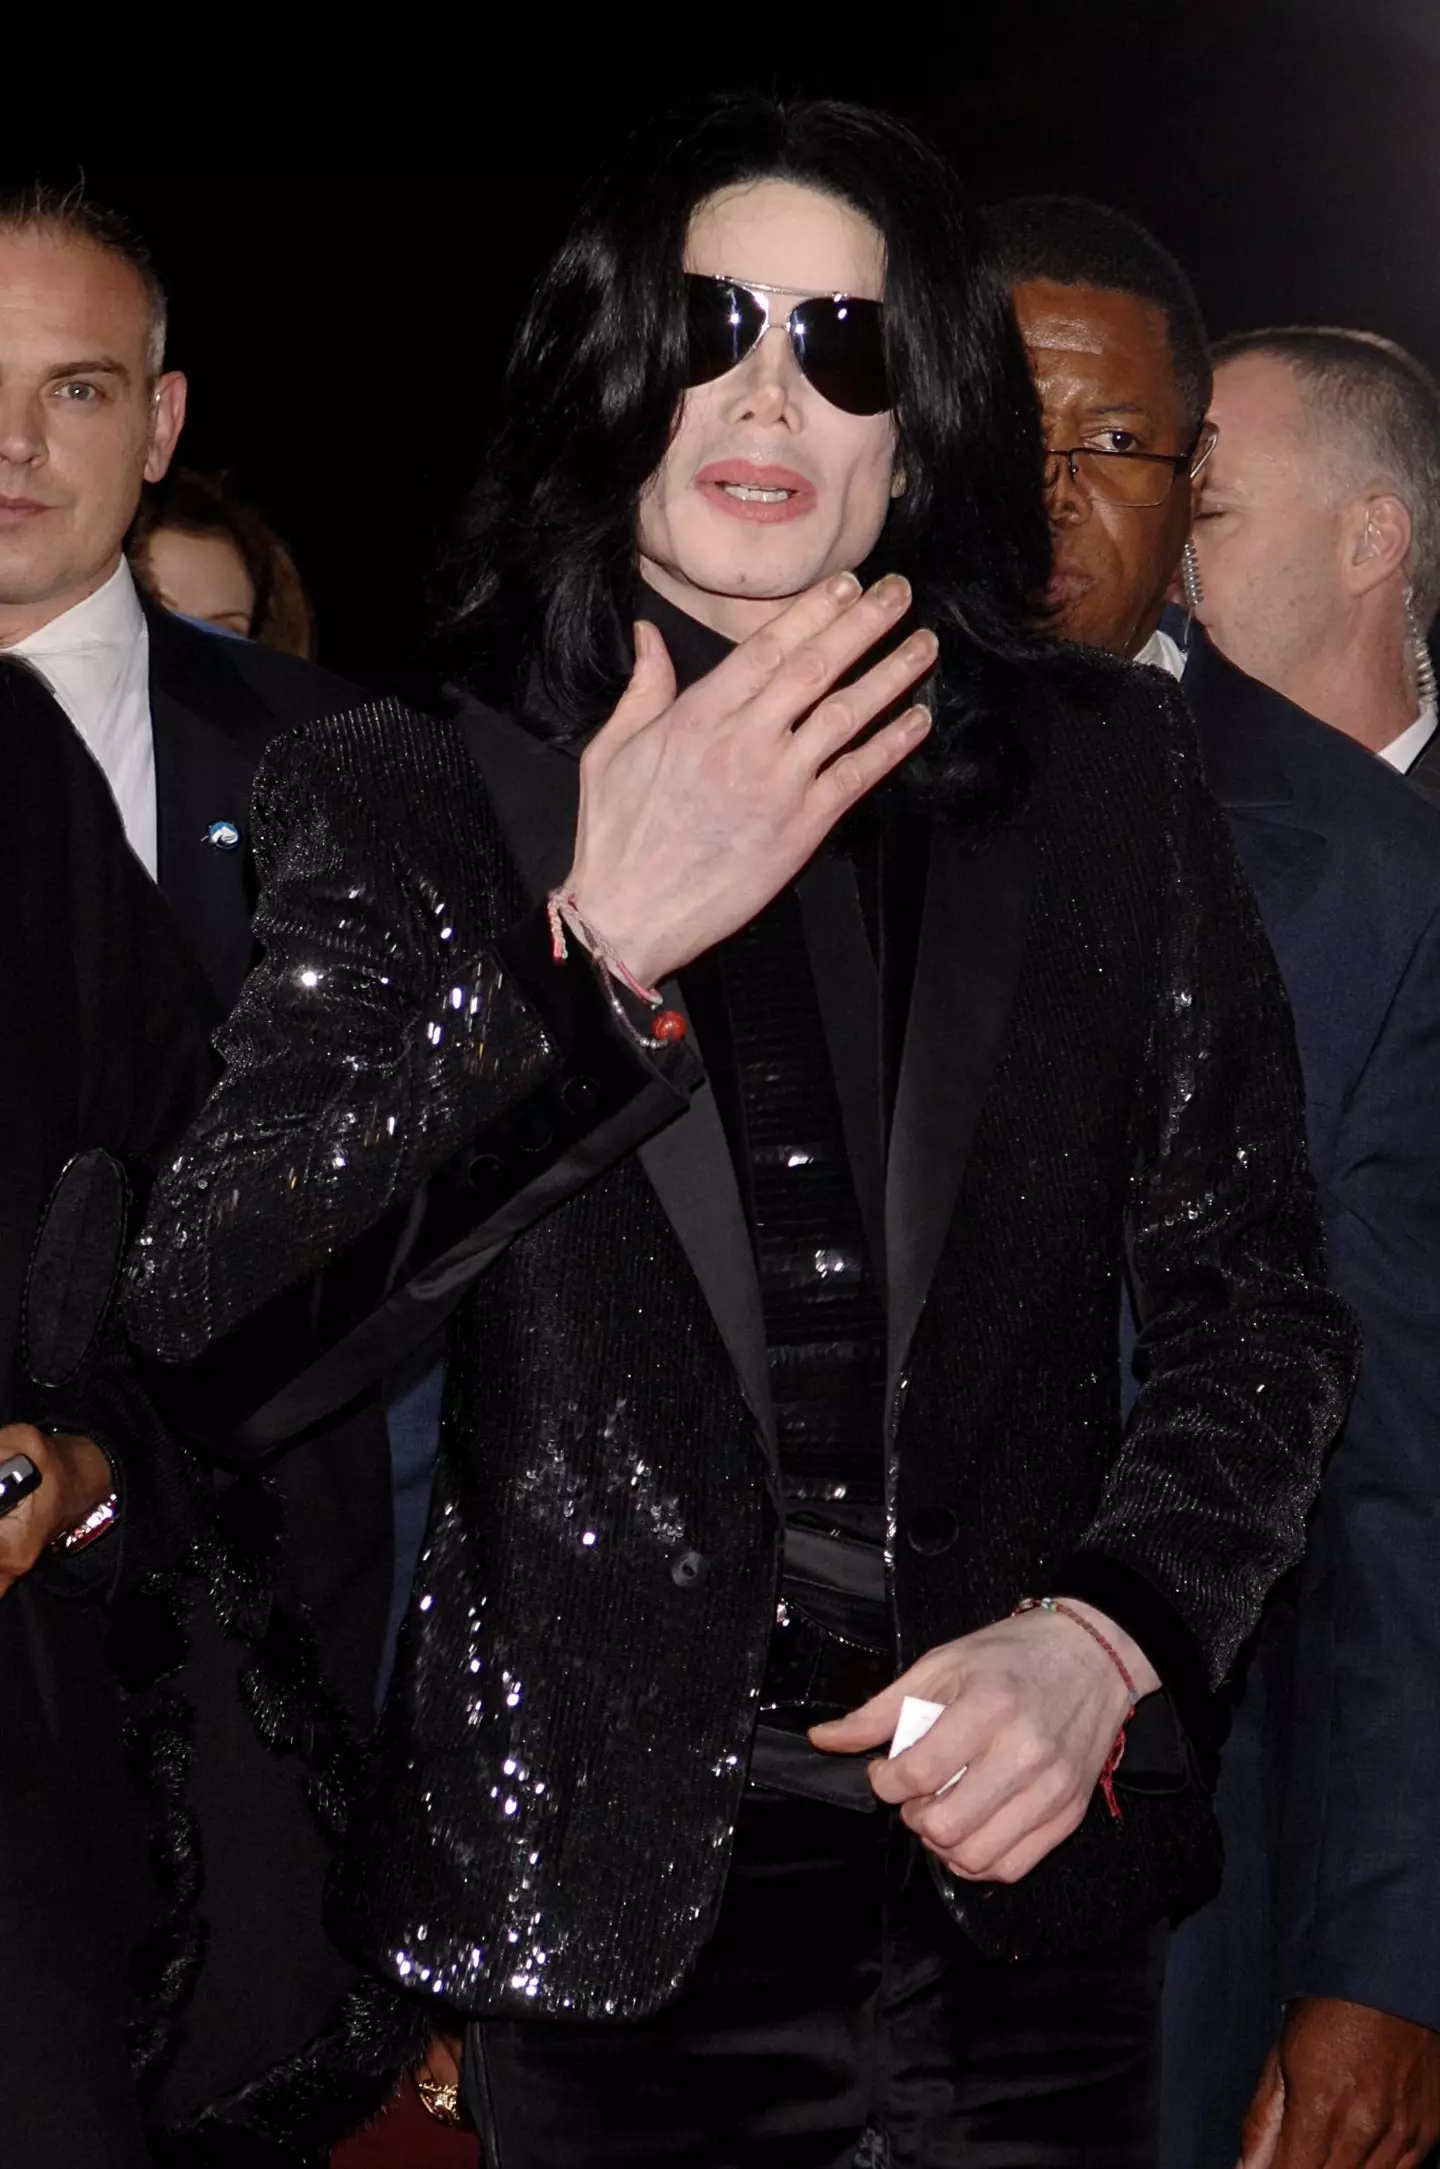 Jackson was in London for the World Music Award in 2006.